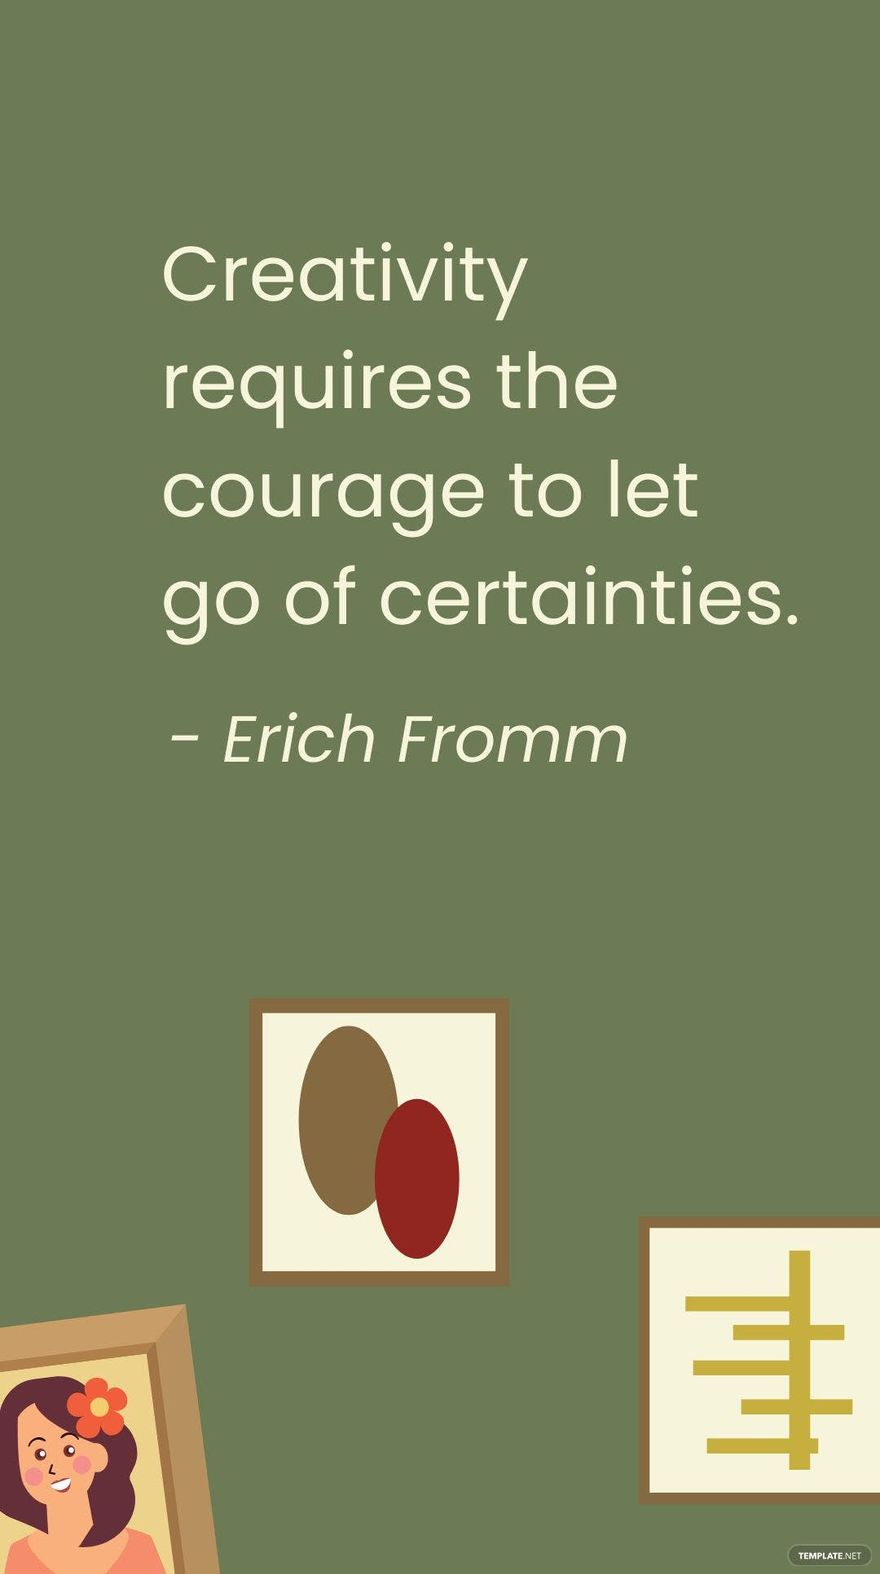 Free Erich Fromm - Creativity requires the courage to let go of certainties. in JPG